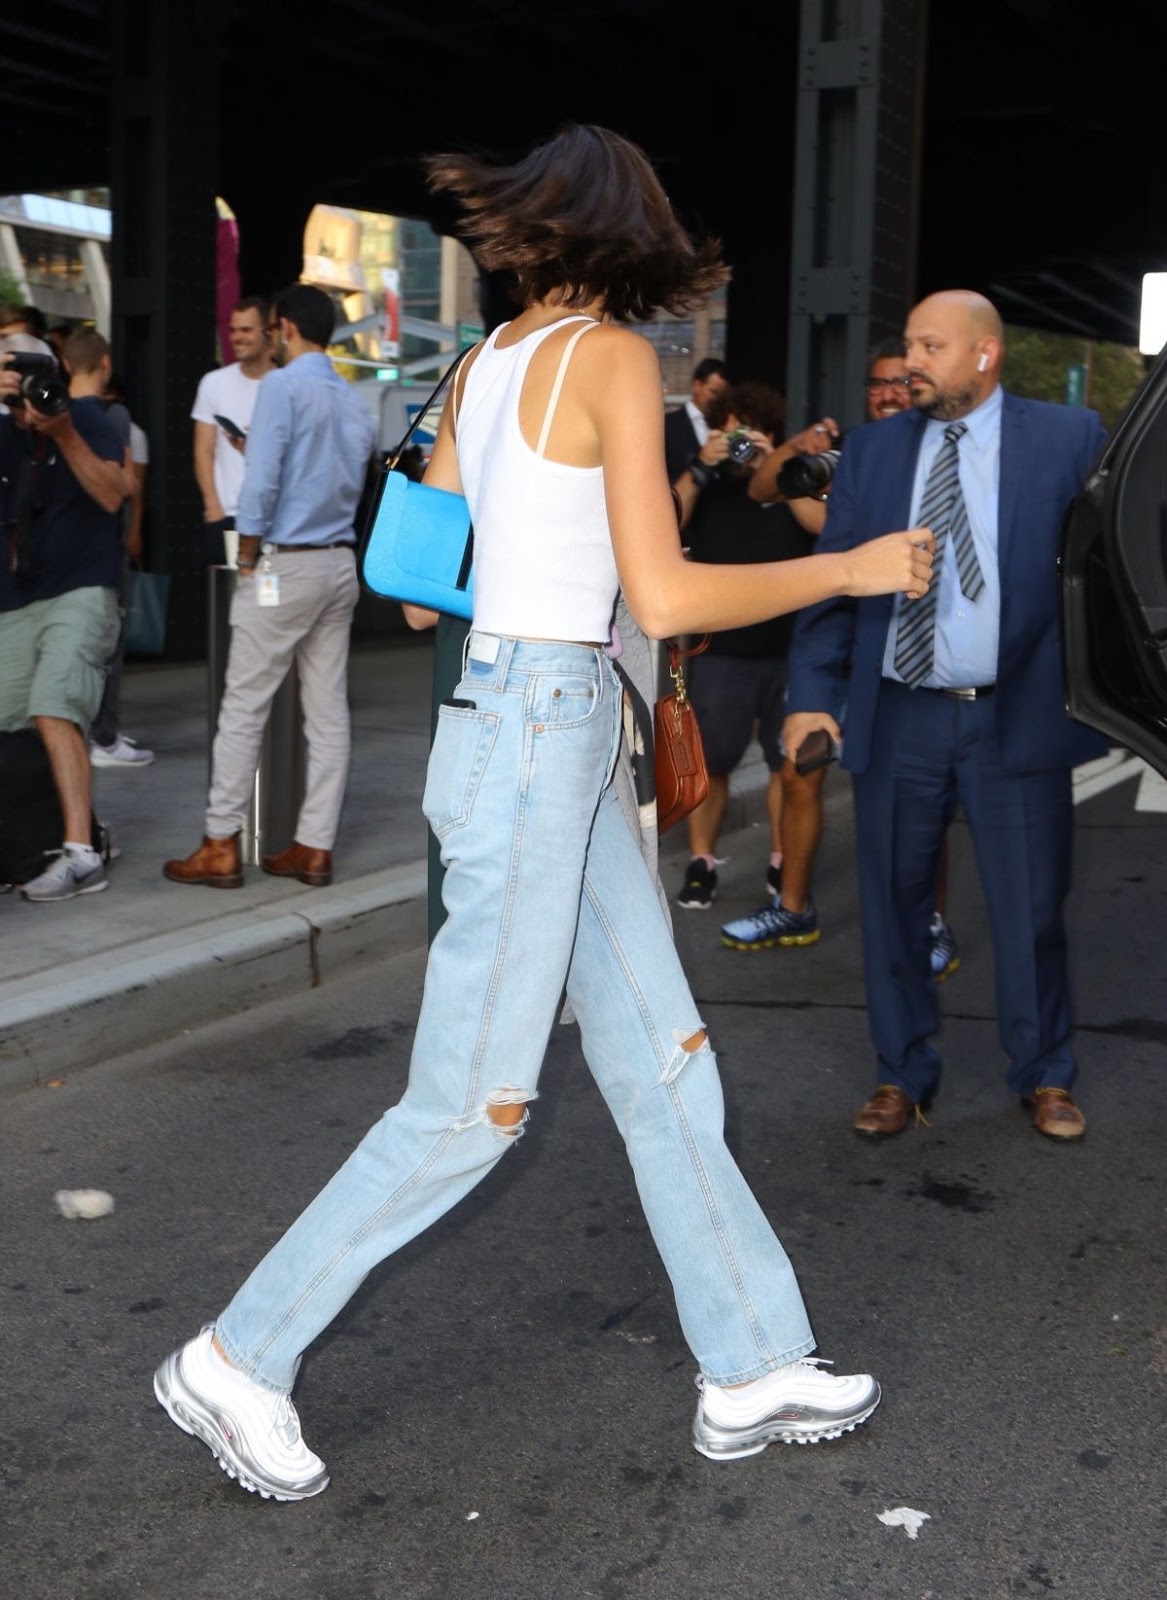 Kaia Gerber Leaves a Fashion Show in New York 10 Sep-2019